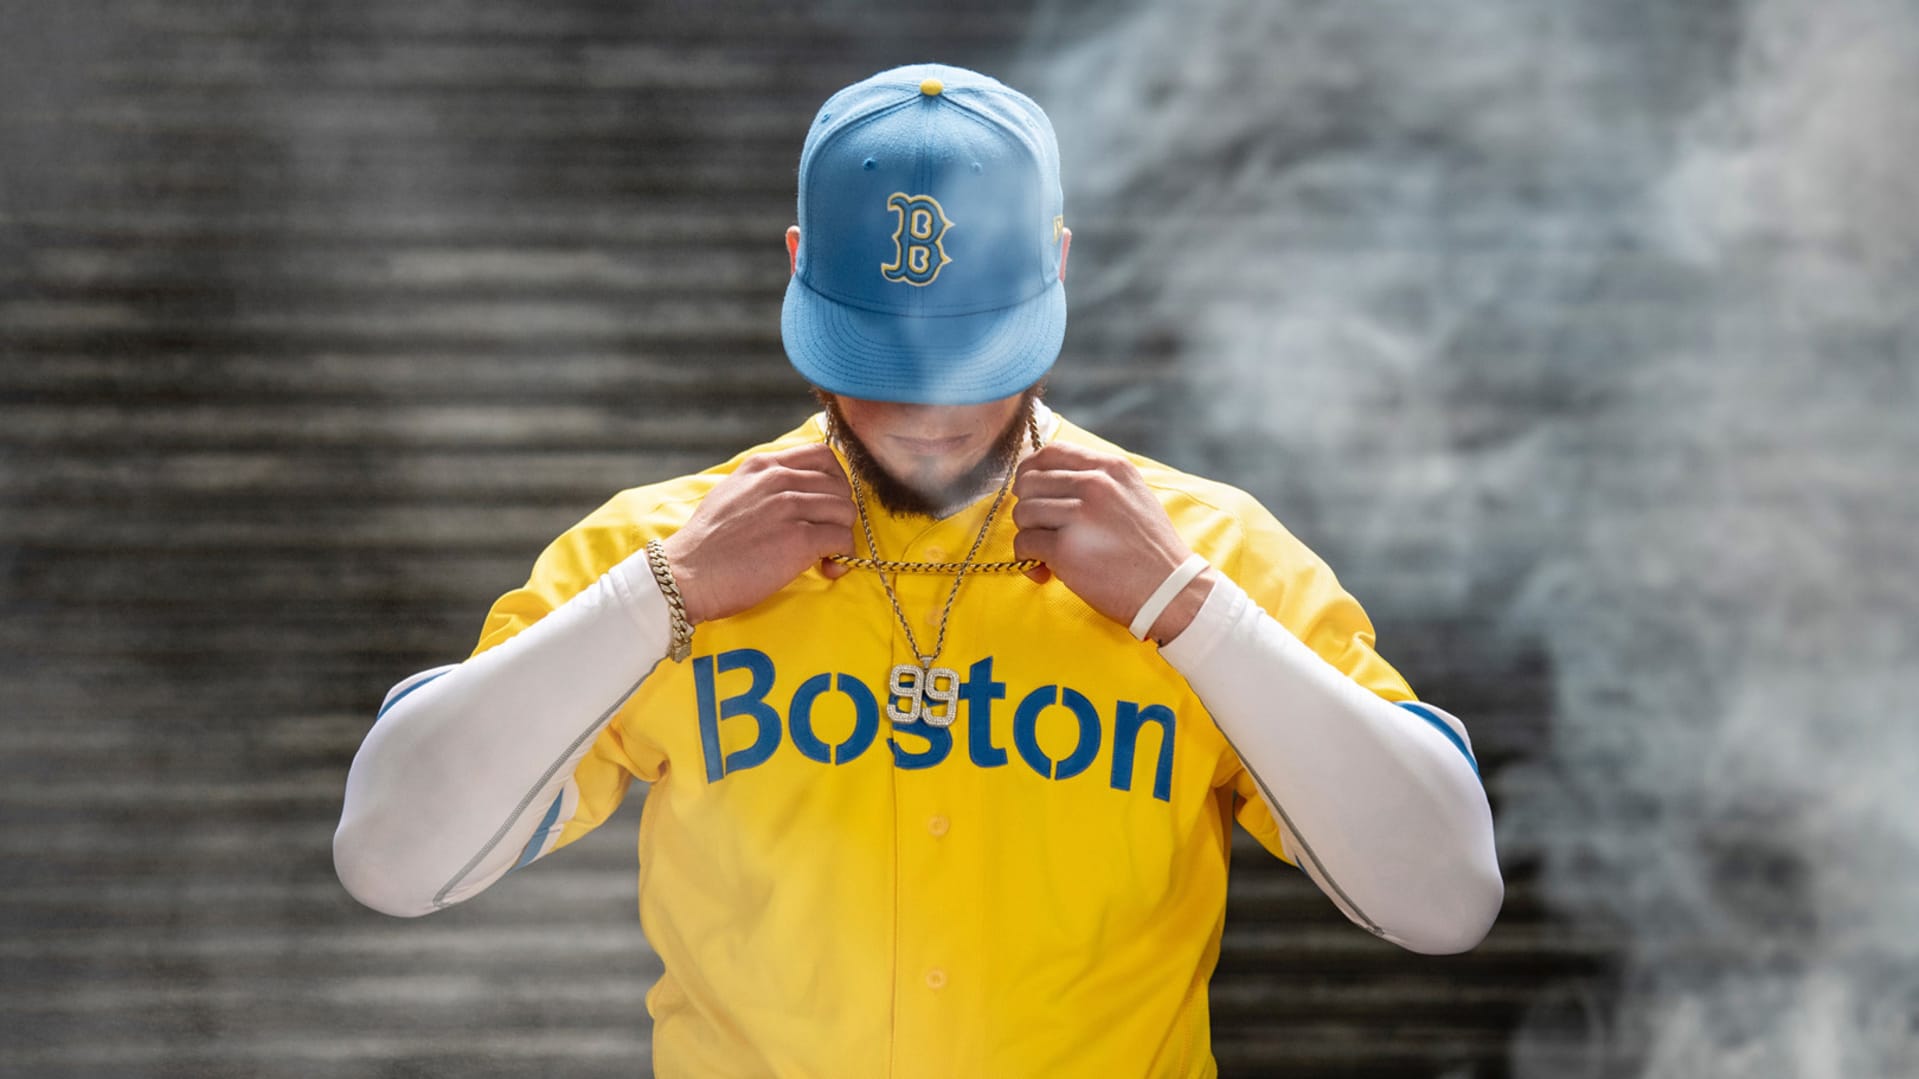 Nike throws tradition out the window with bold, new Boston Red Sox uniforms